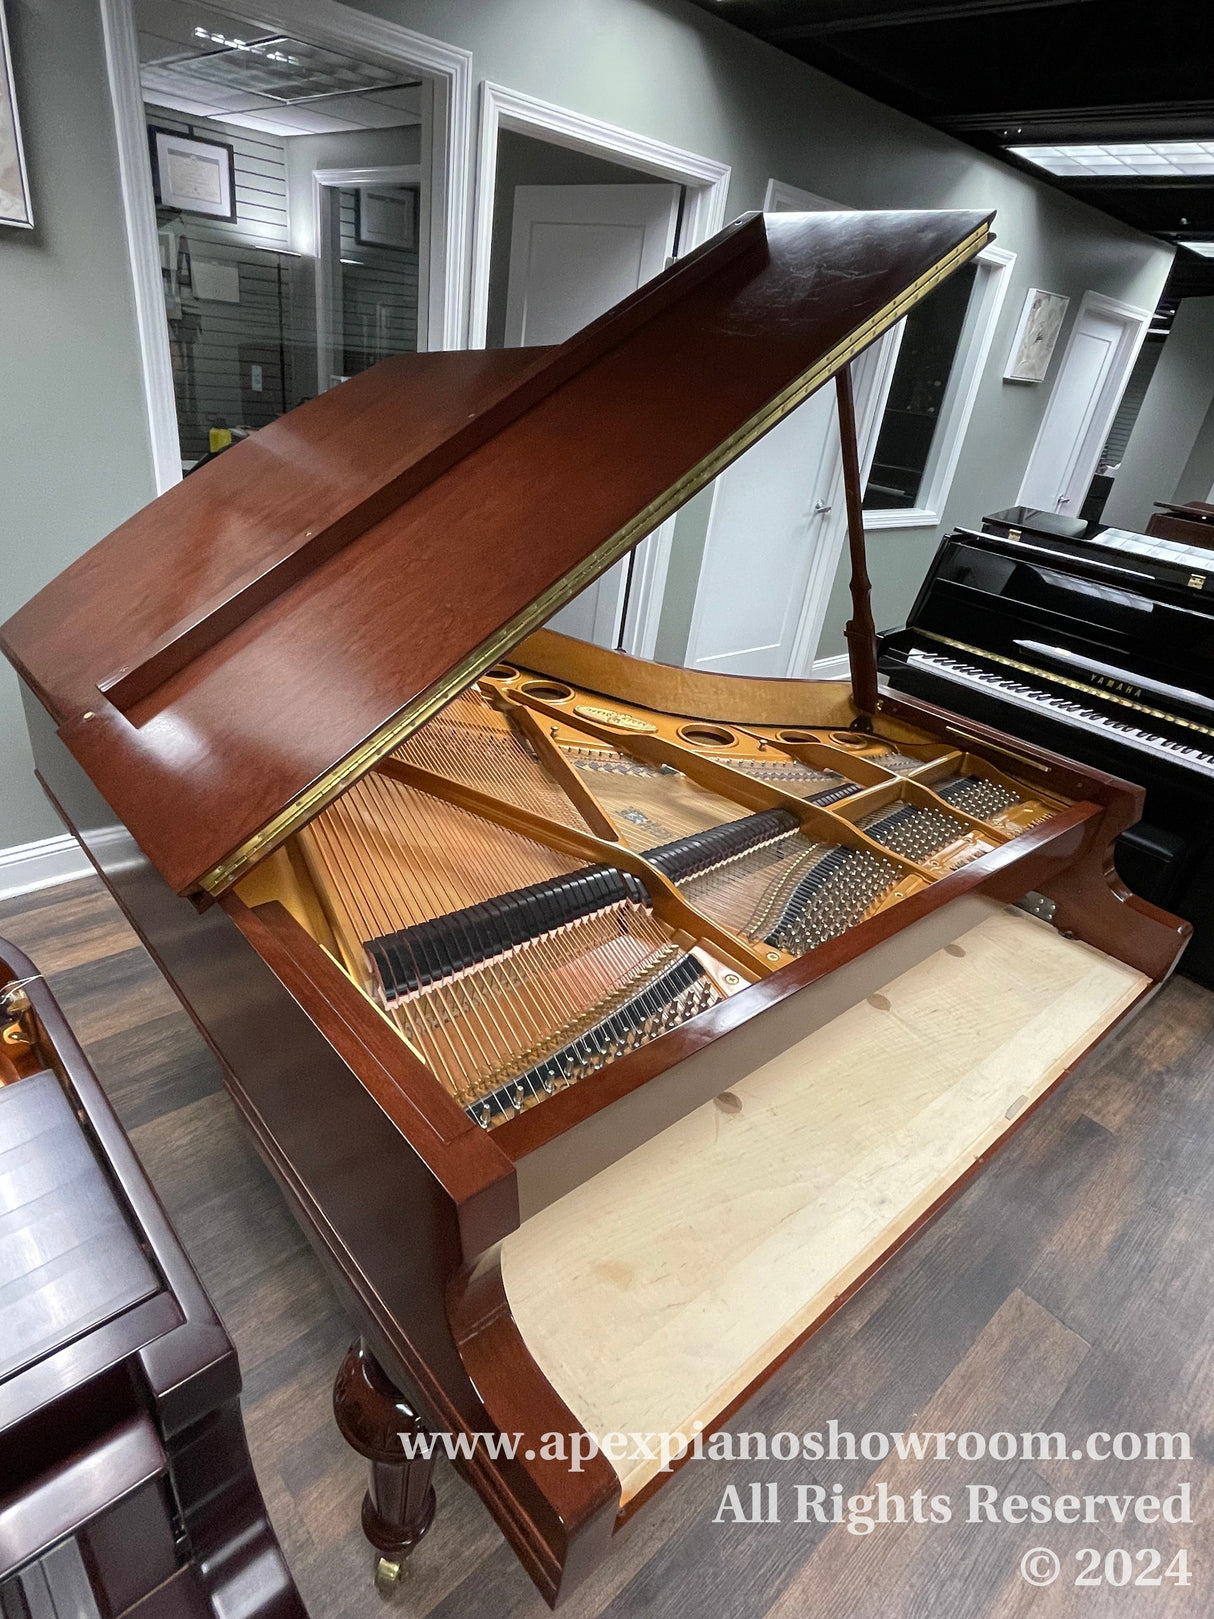 A grand piano with a mahogany finish is open, revealing its intricate internal mechanism of strings and hammers, while the lid is propped up, set against a showroom backdrop with various framed certificates on the wall and a mirror reflecting part of the scene.